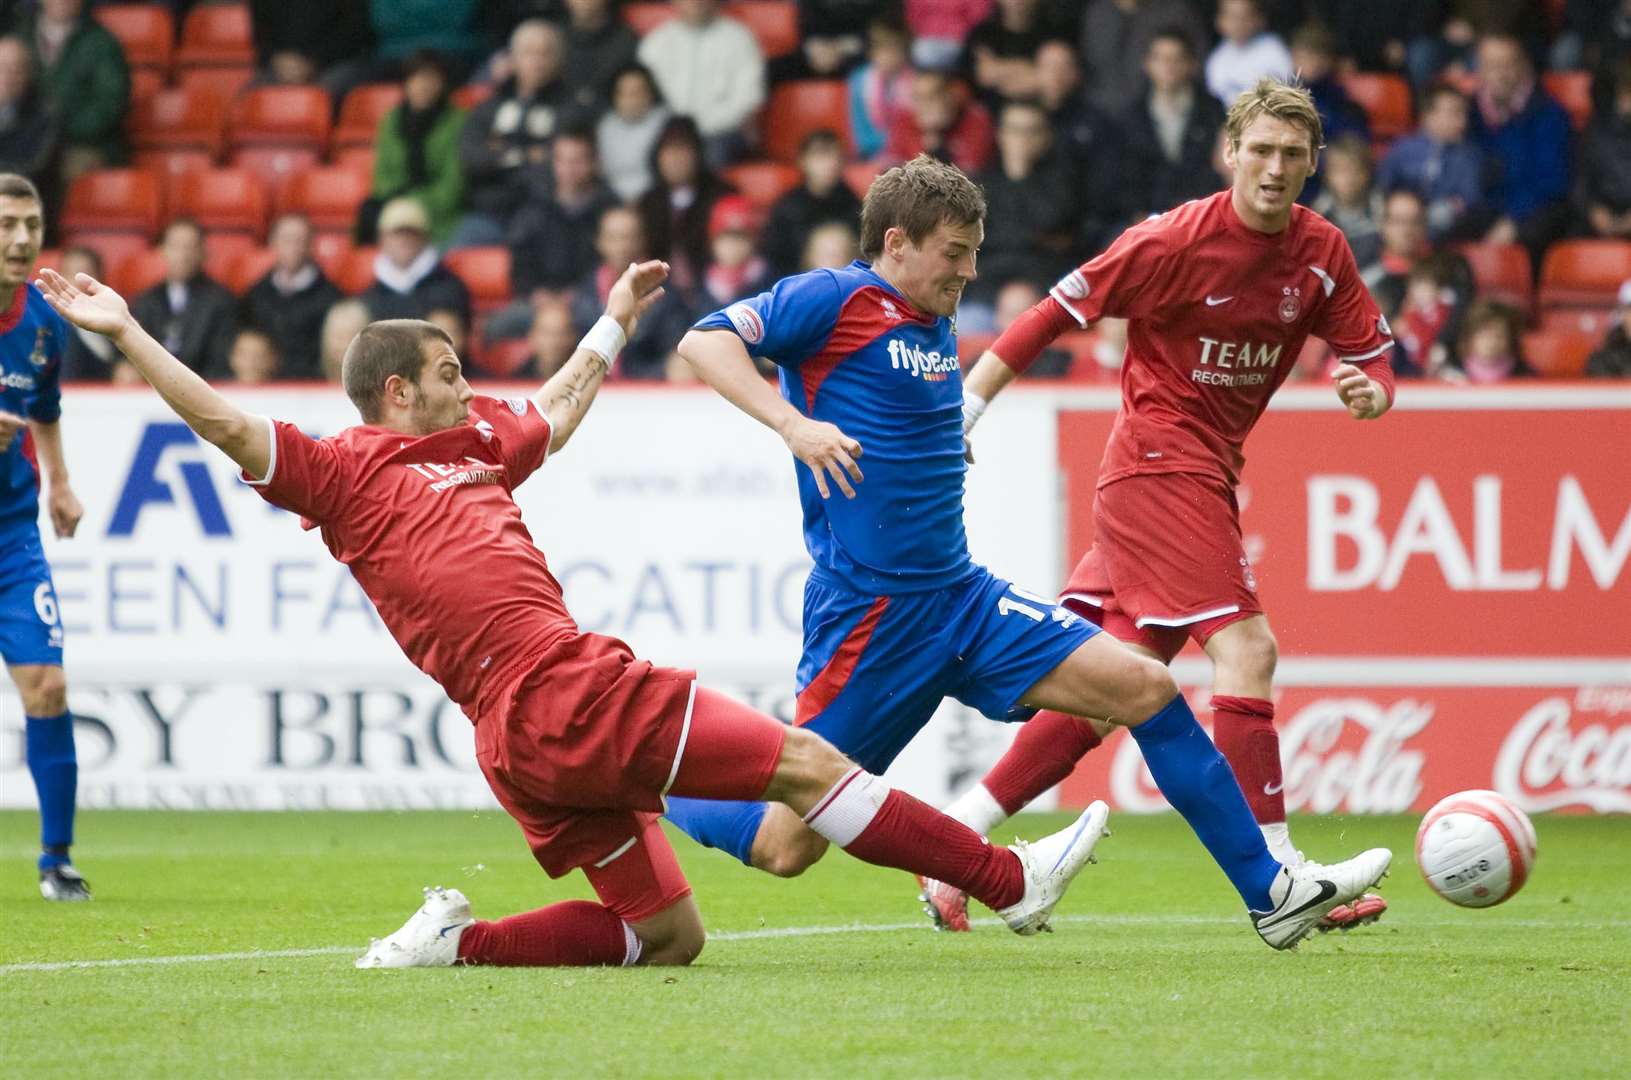 Picture - Ken Macpherson, Inverness. Aberdeen(0) v Inverness CT(2). 9.8.08. CT striker Andy Barrowman steps in to open the scoring past Aberdeen 'keeper Jamie Langfield..